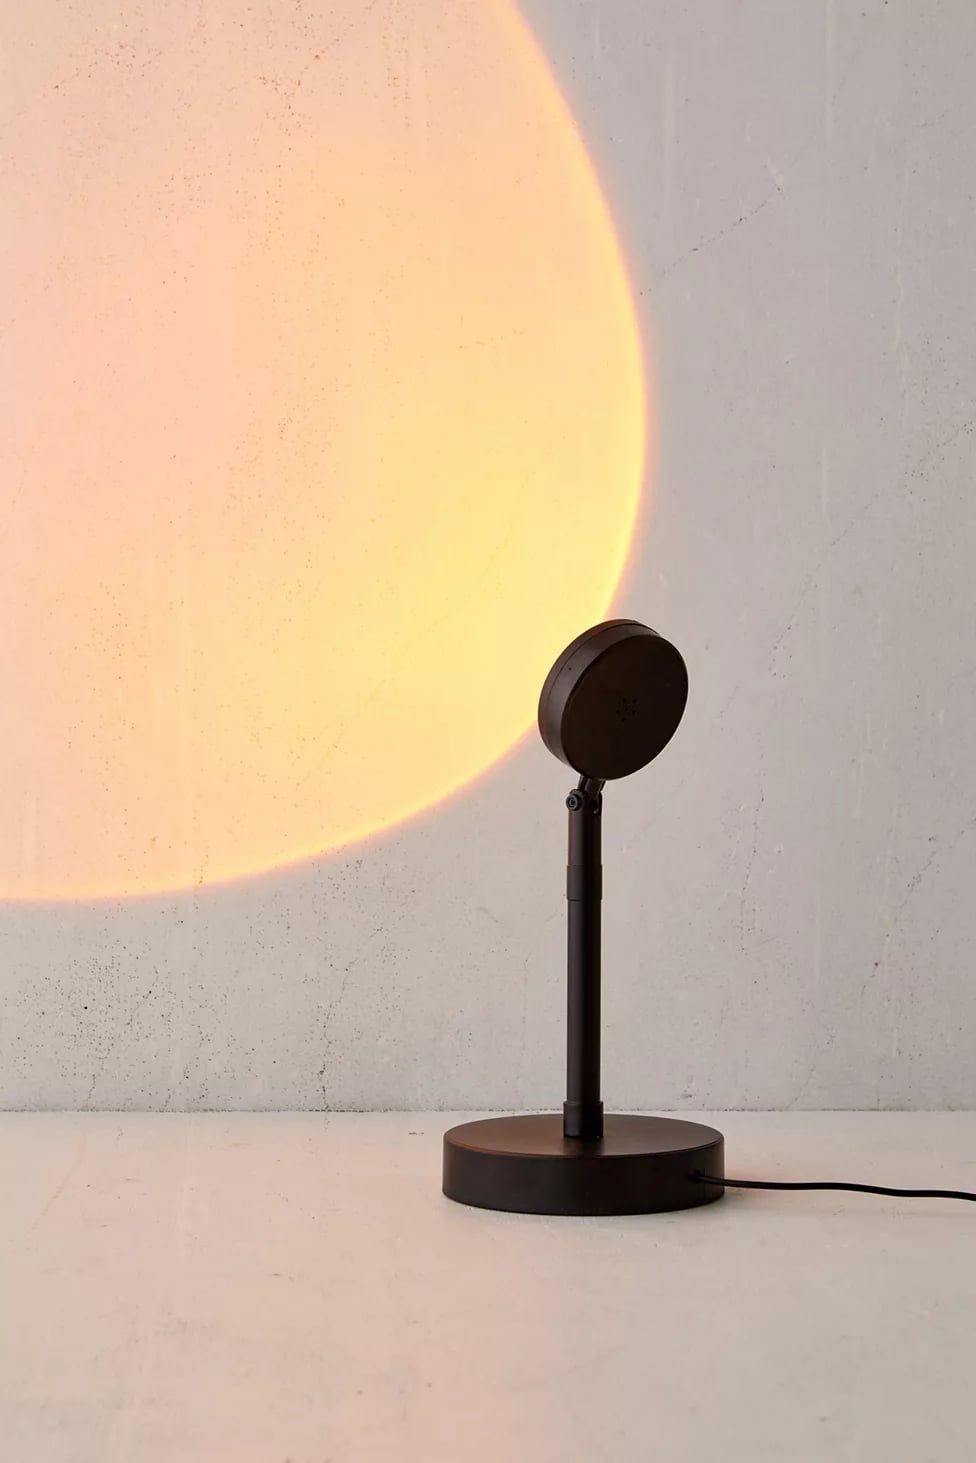 A Cool Brilliant Sunset Lamp | 17 Urban Outfitters Gadgets You Didn't Know Needed | Smart Living Photo 5